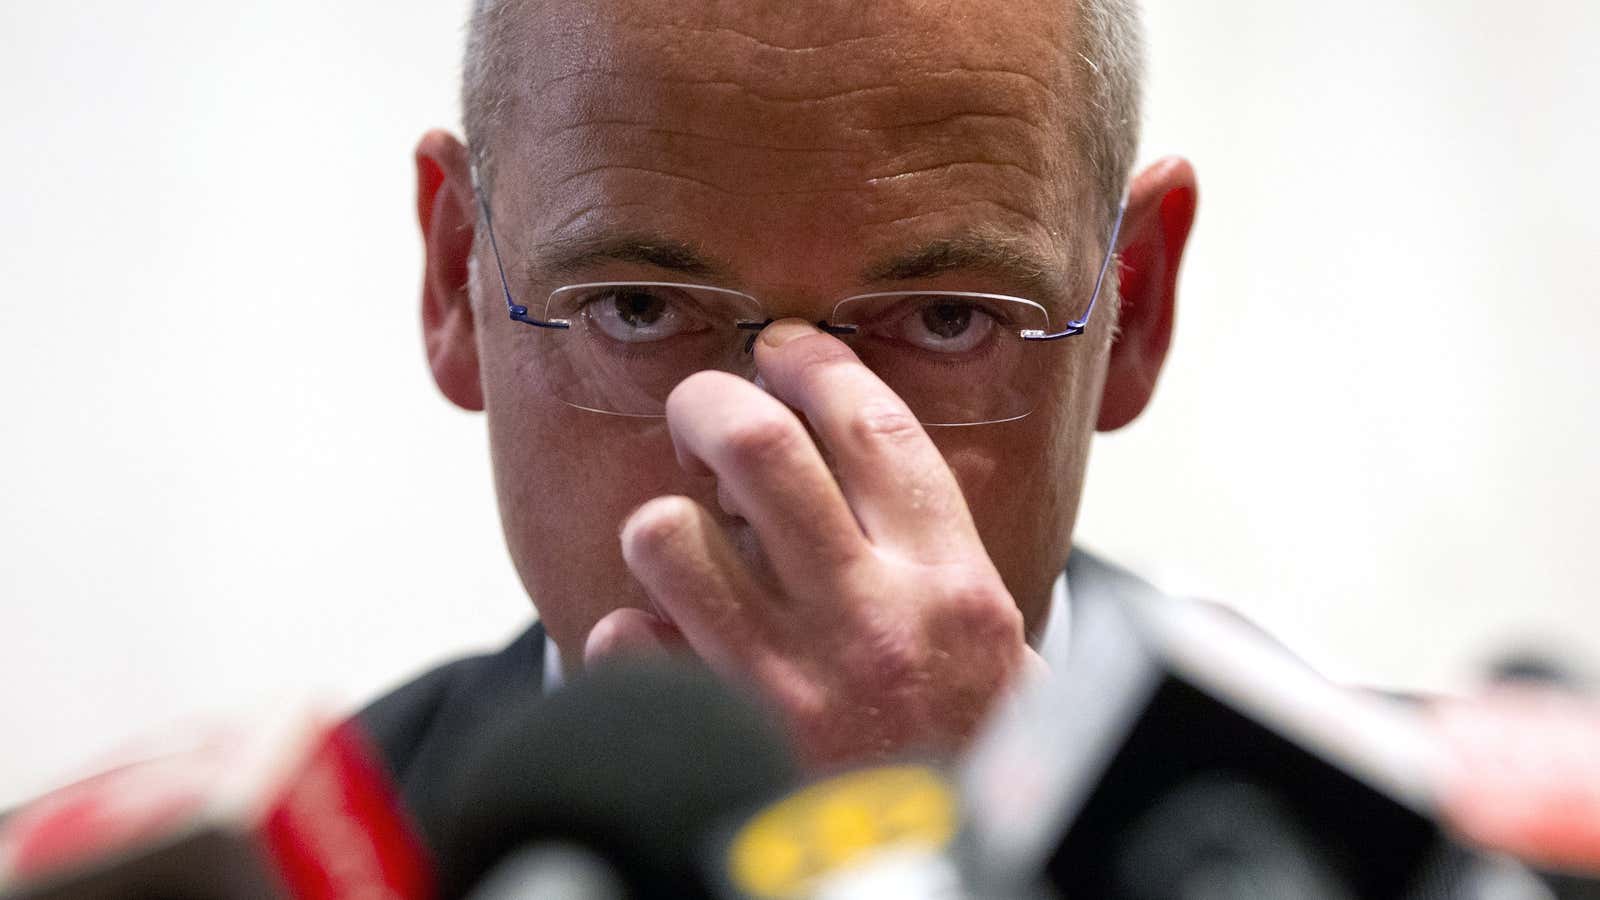 Fonterra Chief Executive Officer Theo Spierings has had better days.